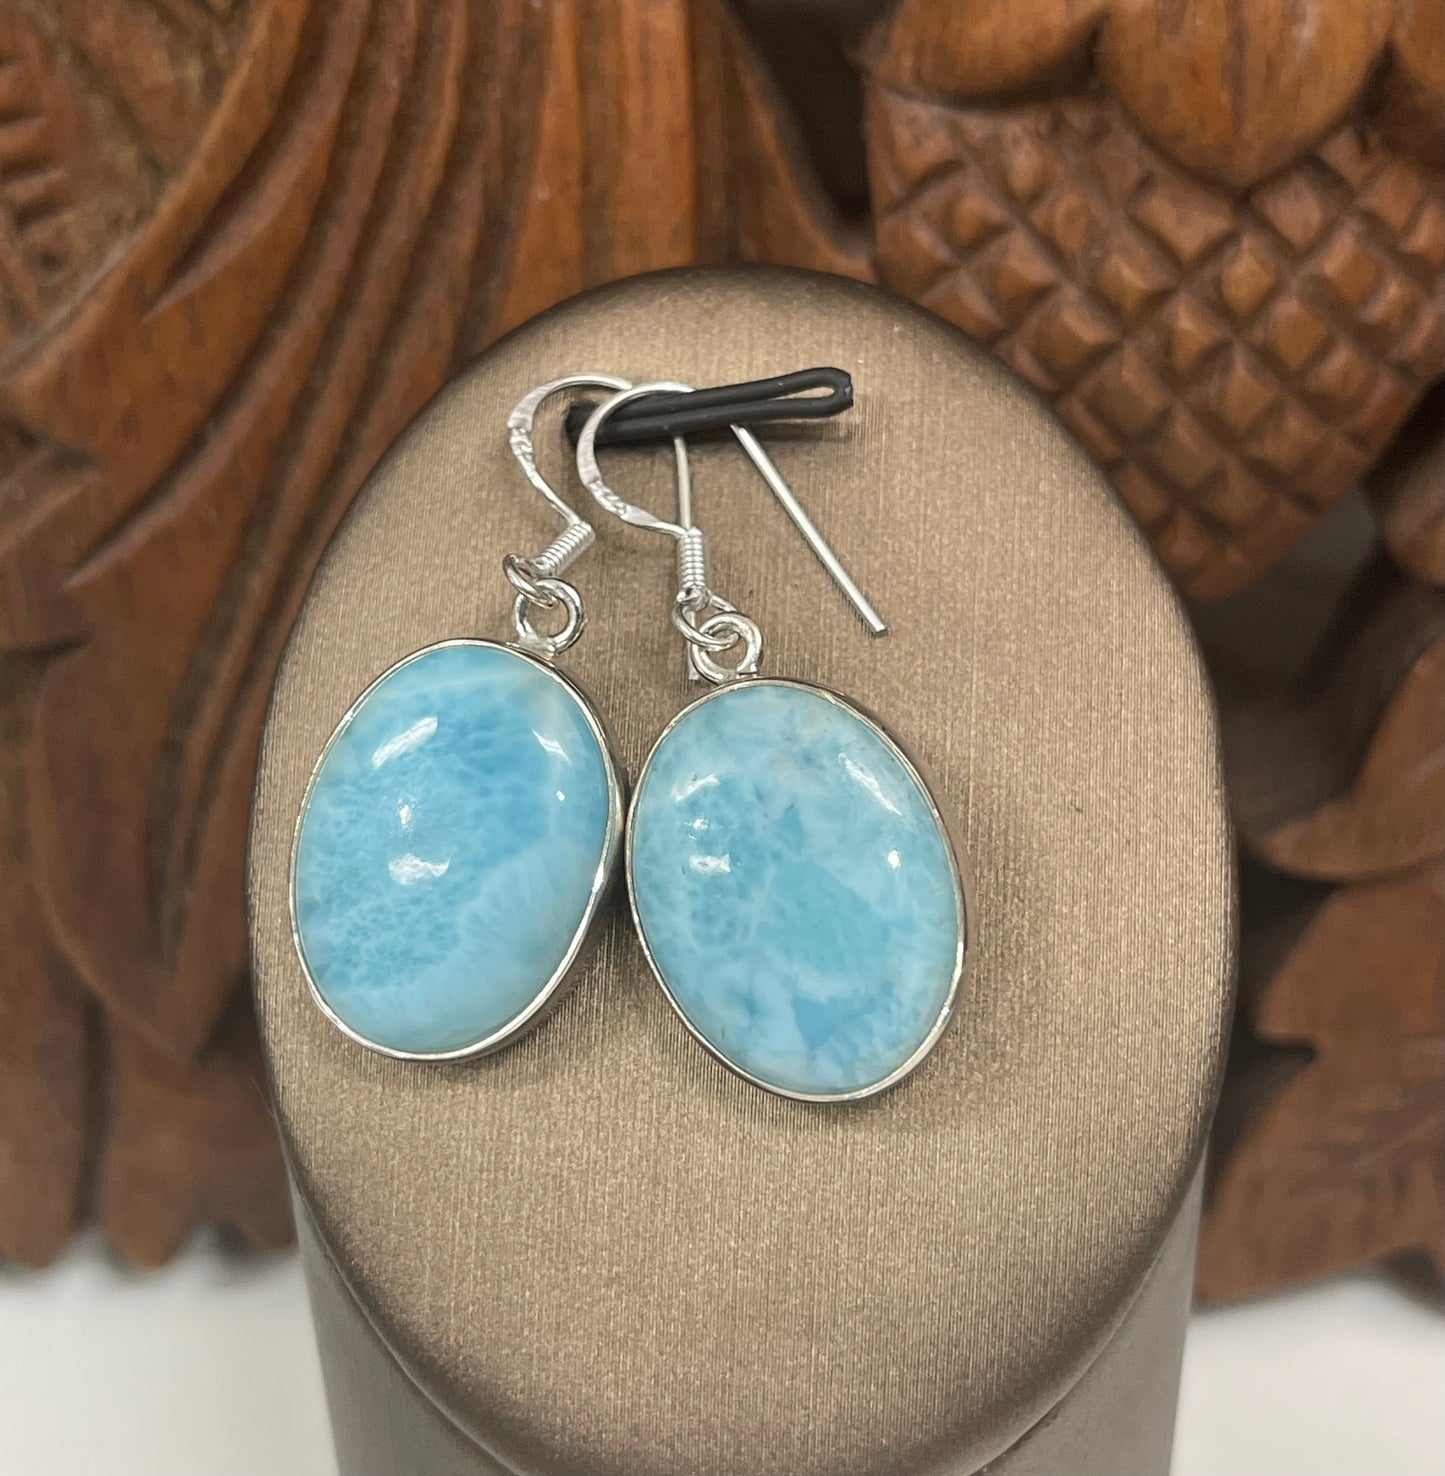 Larimar Sterling Silver Earrings - 4 sizes Available